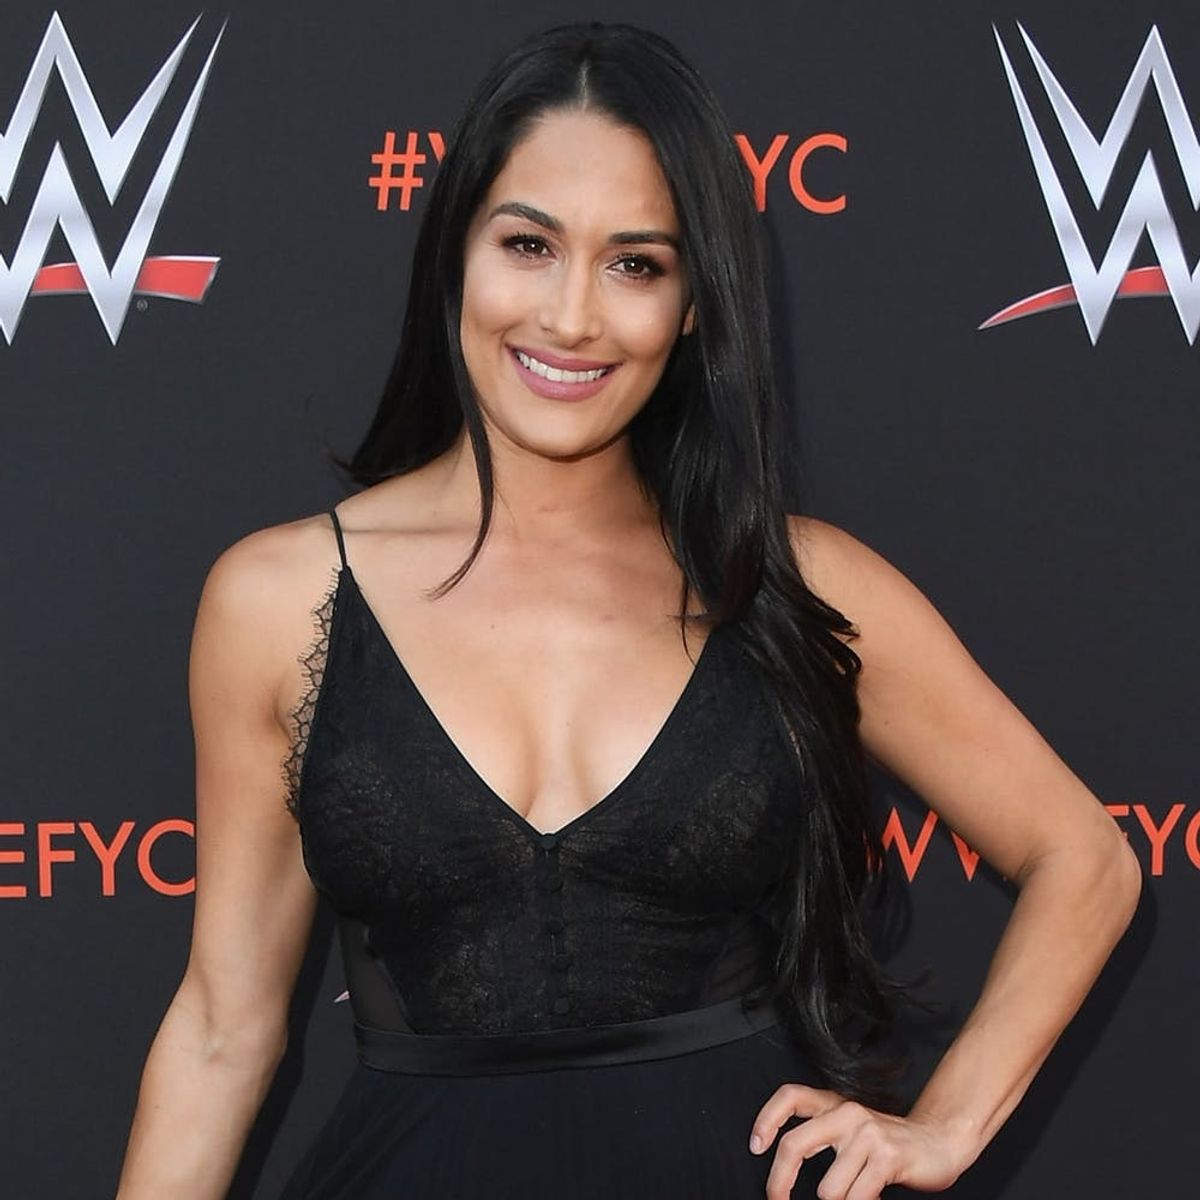 Nikki Bella Posted a Heartbreaking Note on What Would Have Been Her 6th Anniversary With John Cena